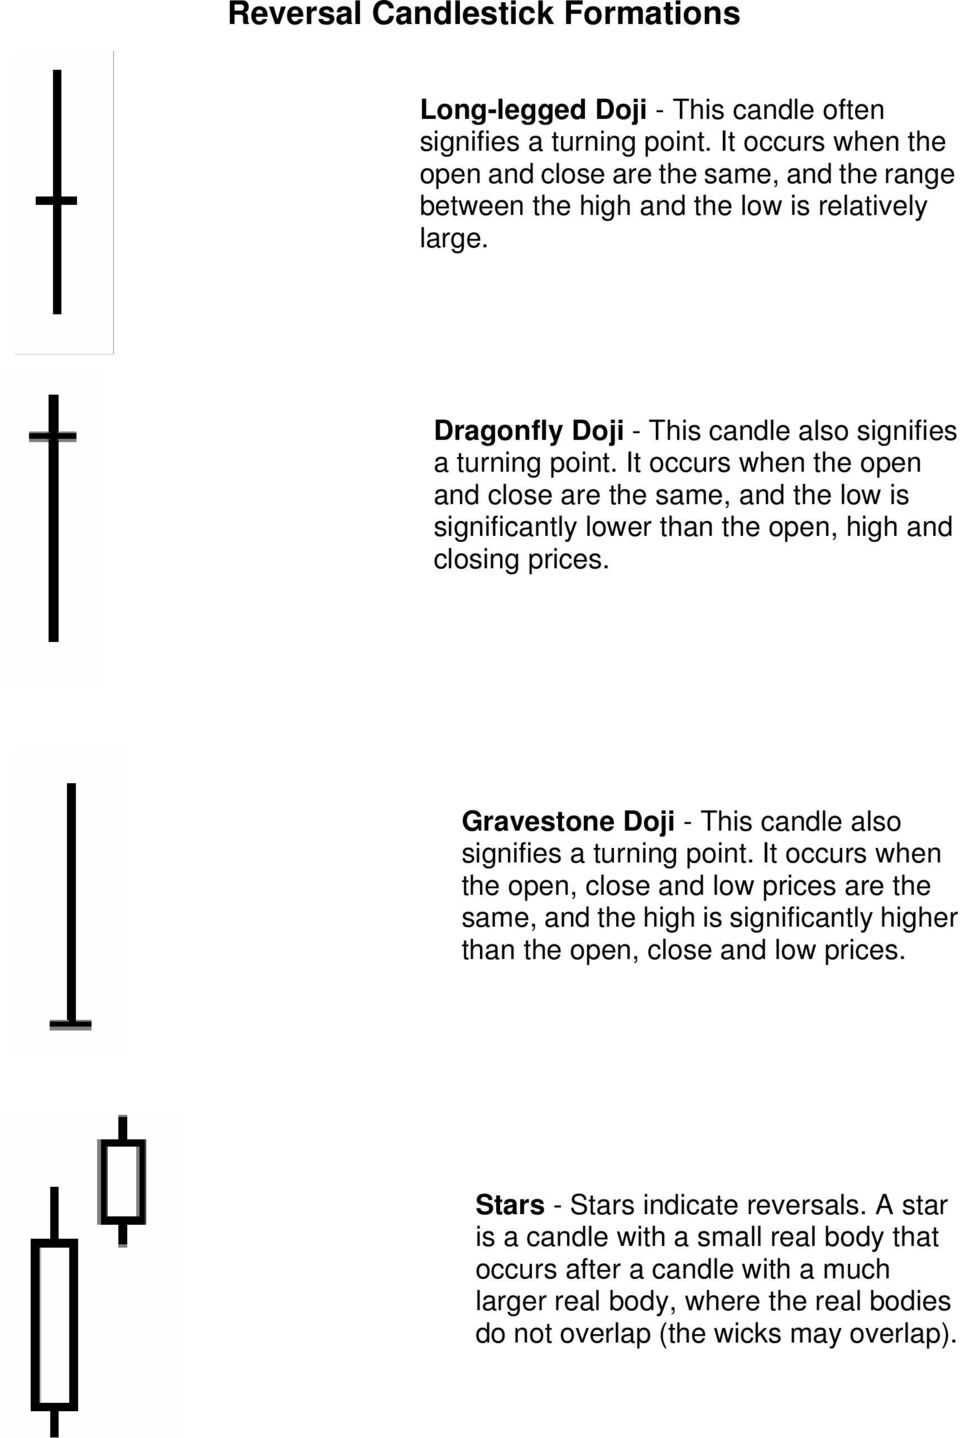 It occurs when the open and close are the same, and the low is significantly lower than the open, high and closing prices. Gravestone Doji - This candle also signifies a turning point.